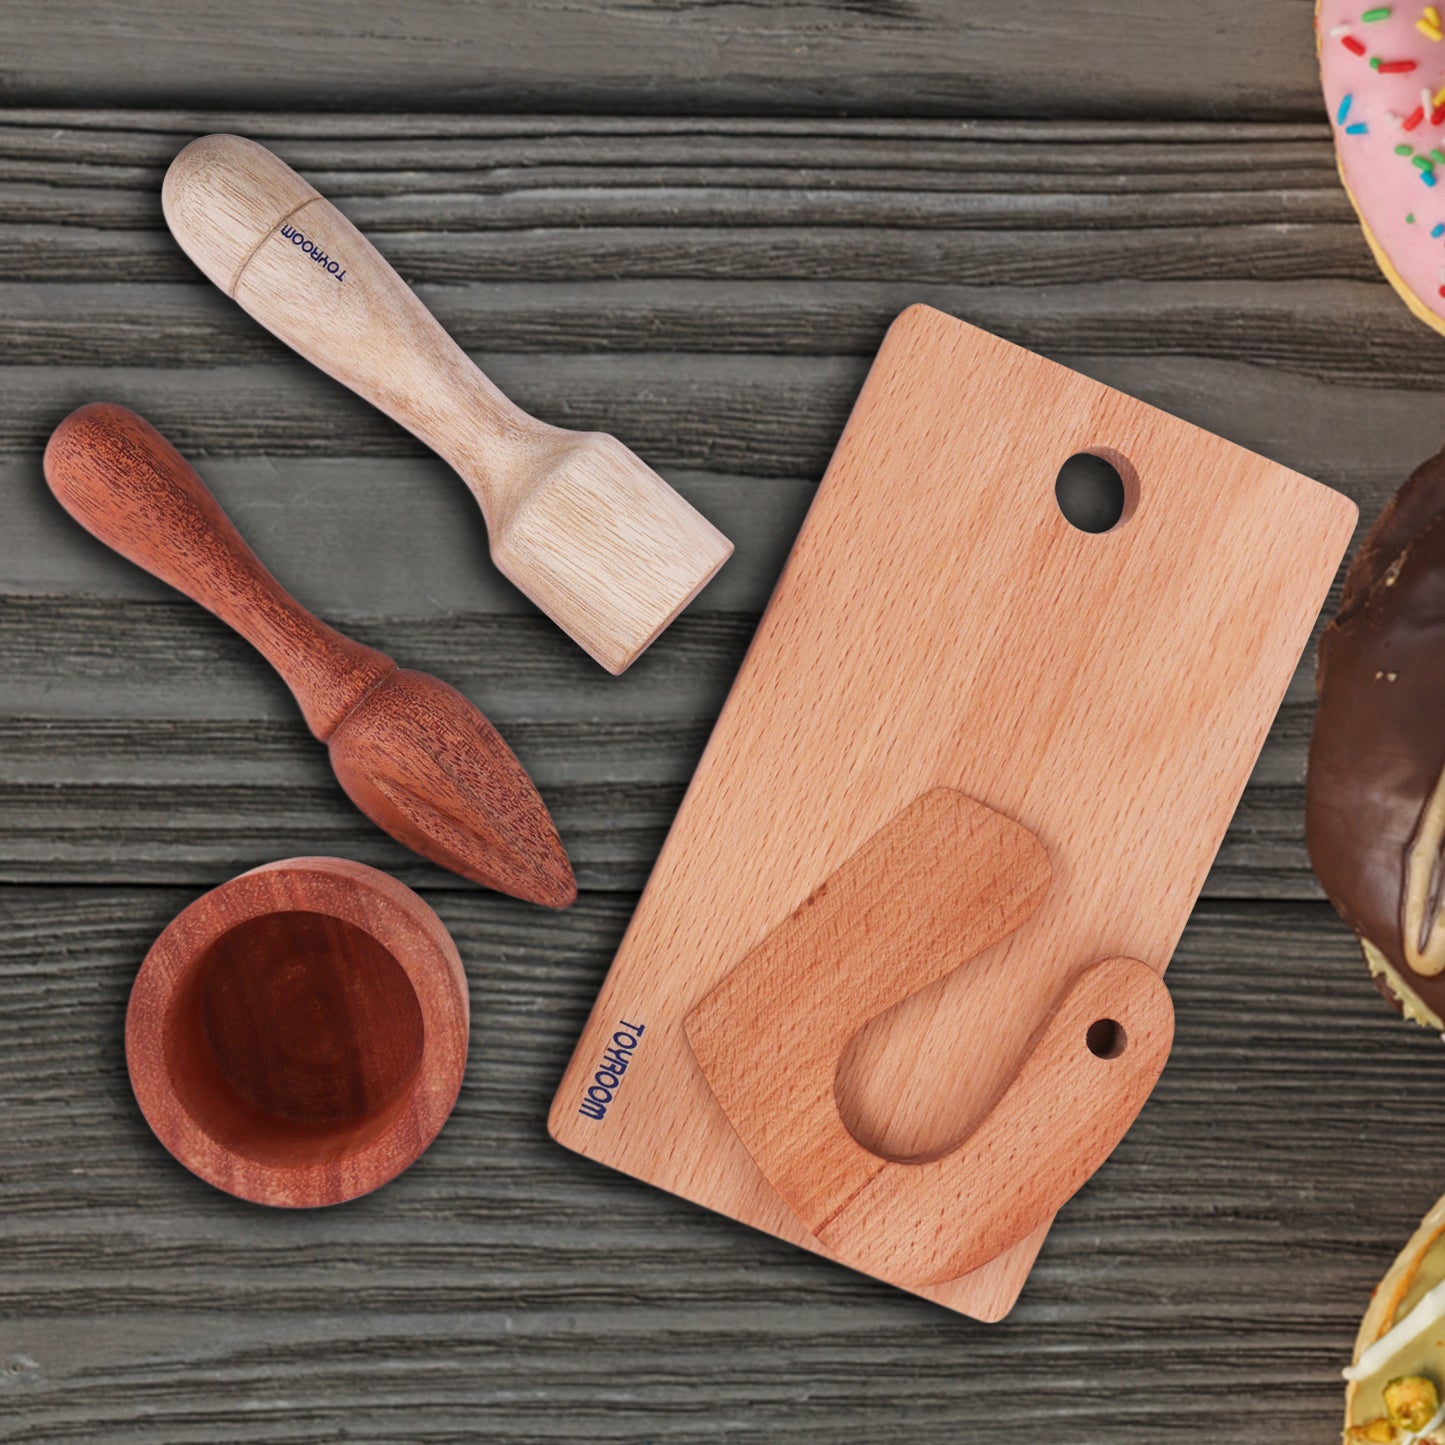 Little Sous Chef's Real Kitchen Tools - Montessori Knife & Cutting board,wooden  Citrus Fruit Juicer & Wooden Mortar & Pestle